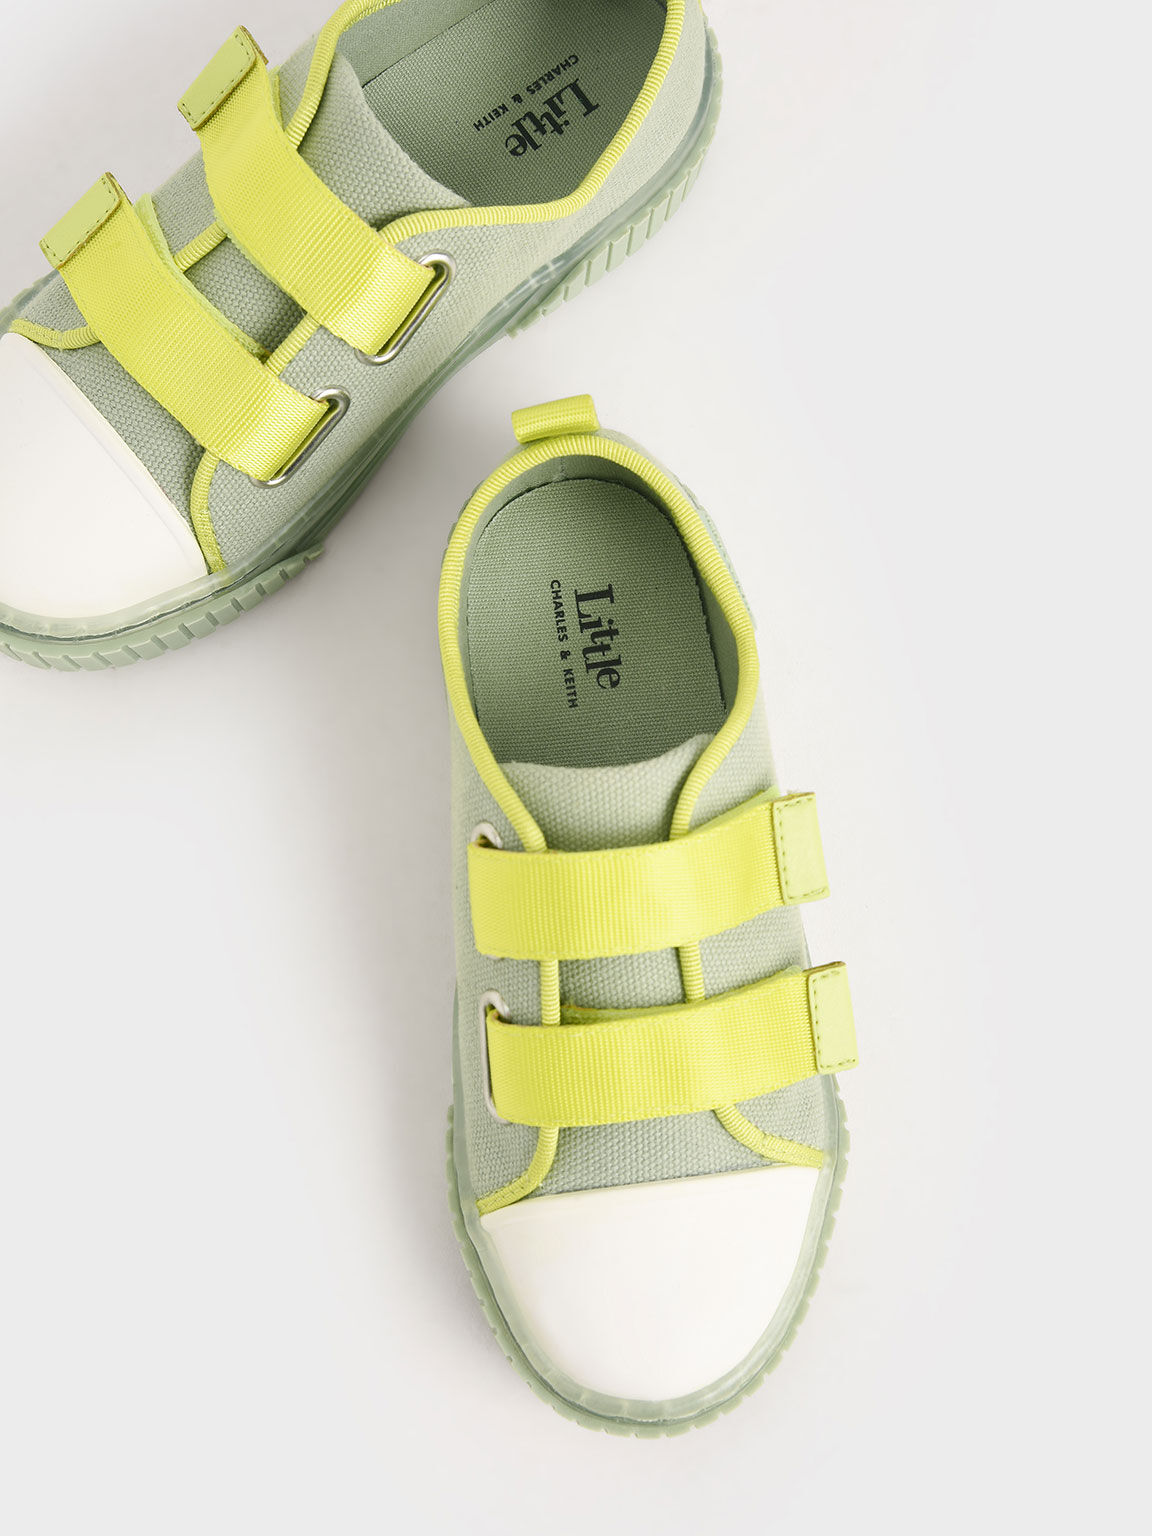 Purpose Collection 2021: Girls' Organic Cotton Sneakers, Mint Green, hi-res